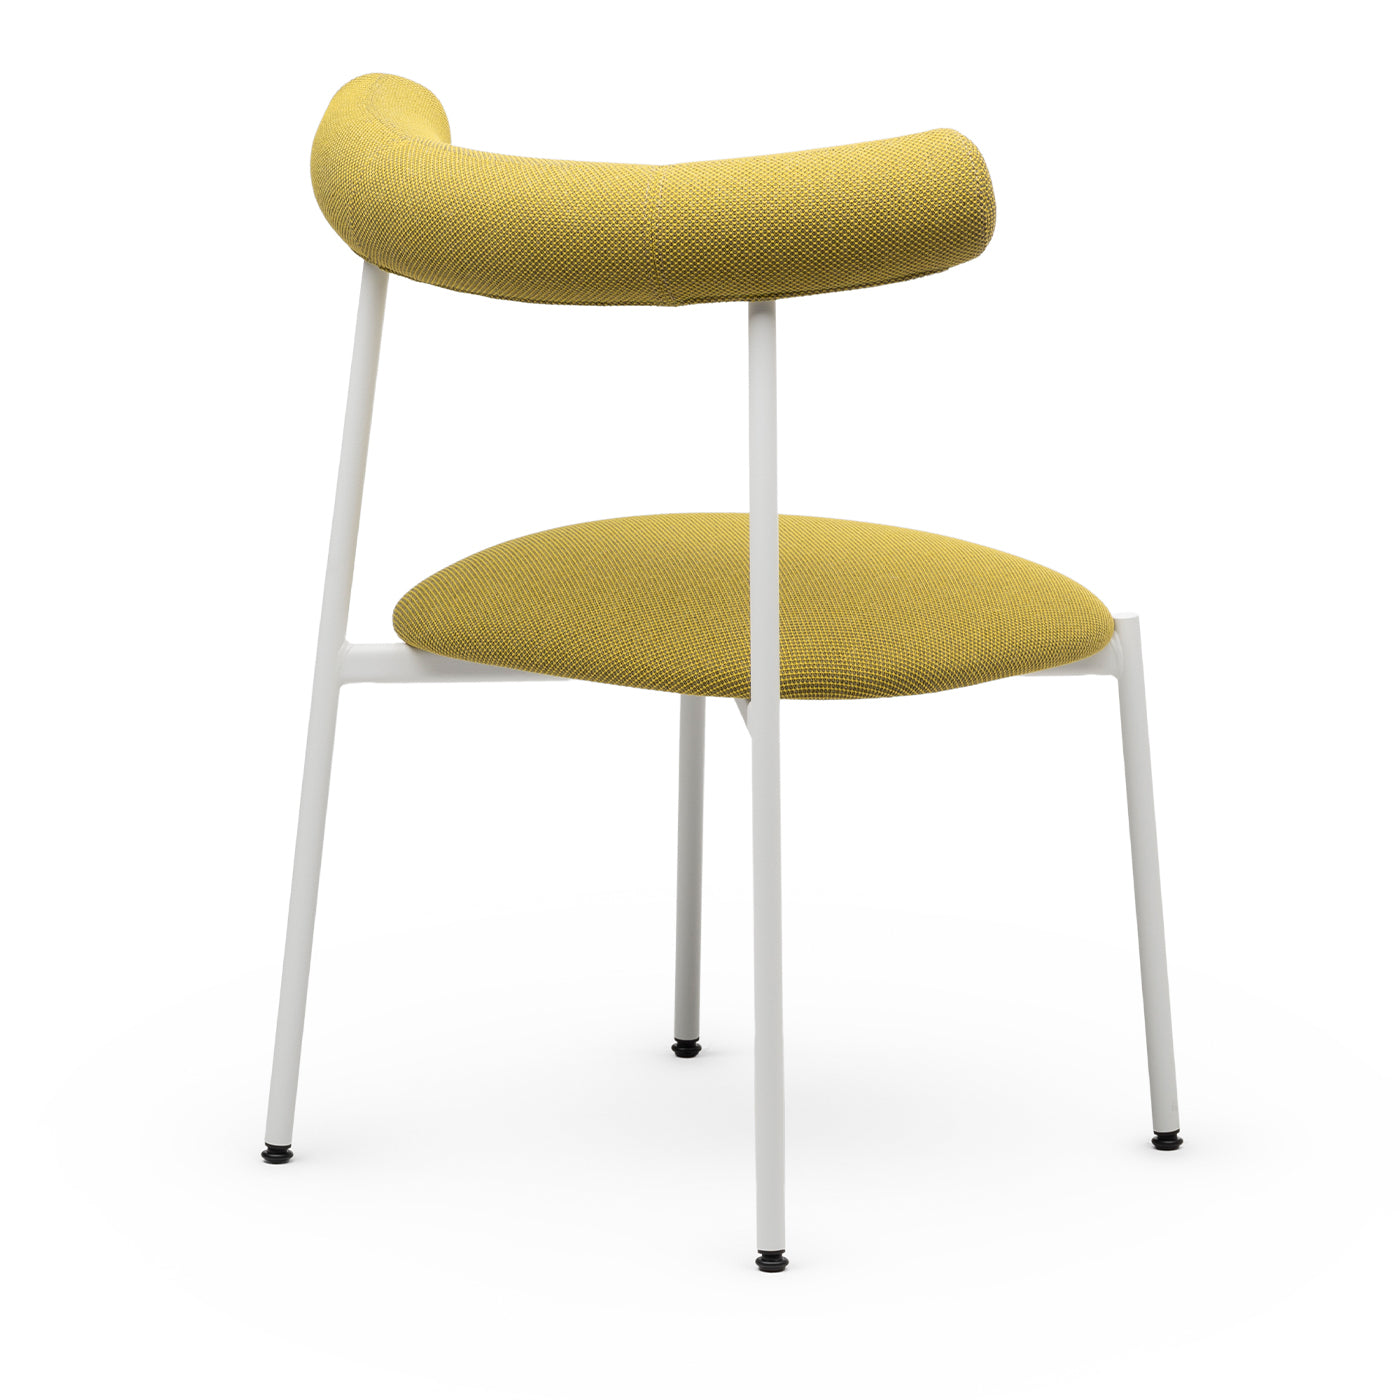 Pampa S Lime-Green & White Chair by Studio Pastina - Alternative view 1